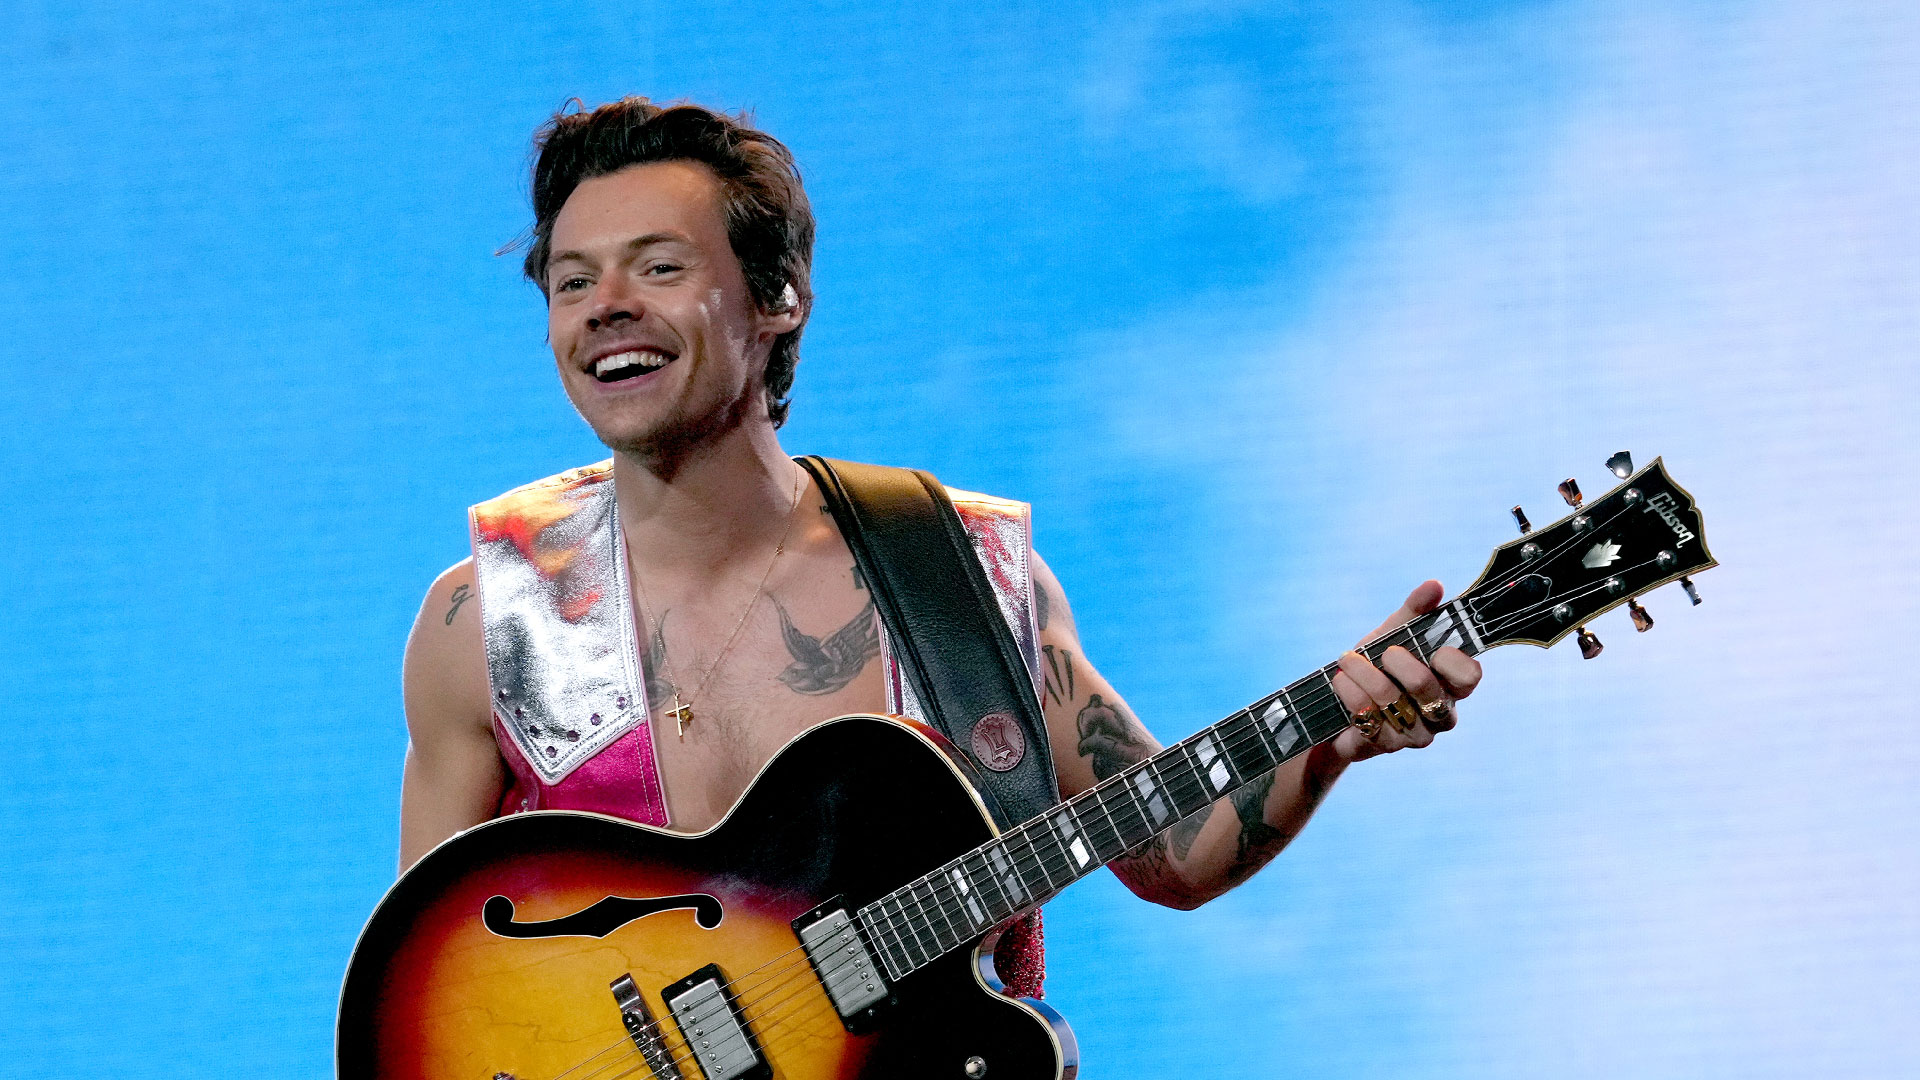 Harry Styles performs on the Coachella stage during the 2022 Coachella Valley Music And Arts Festival on April 22, 2022 in Indio, California.